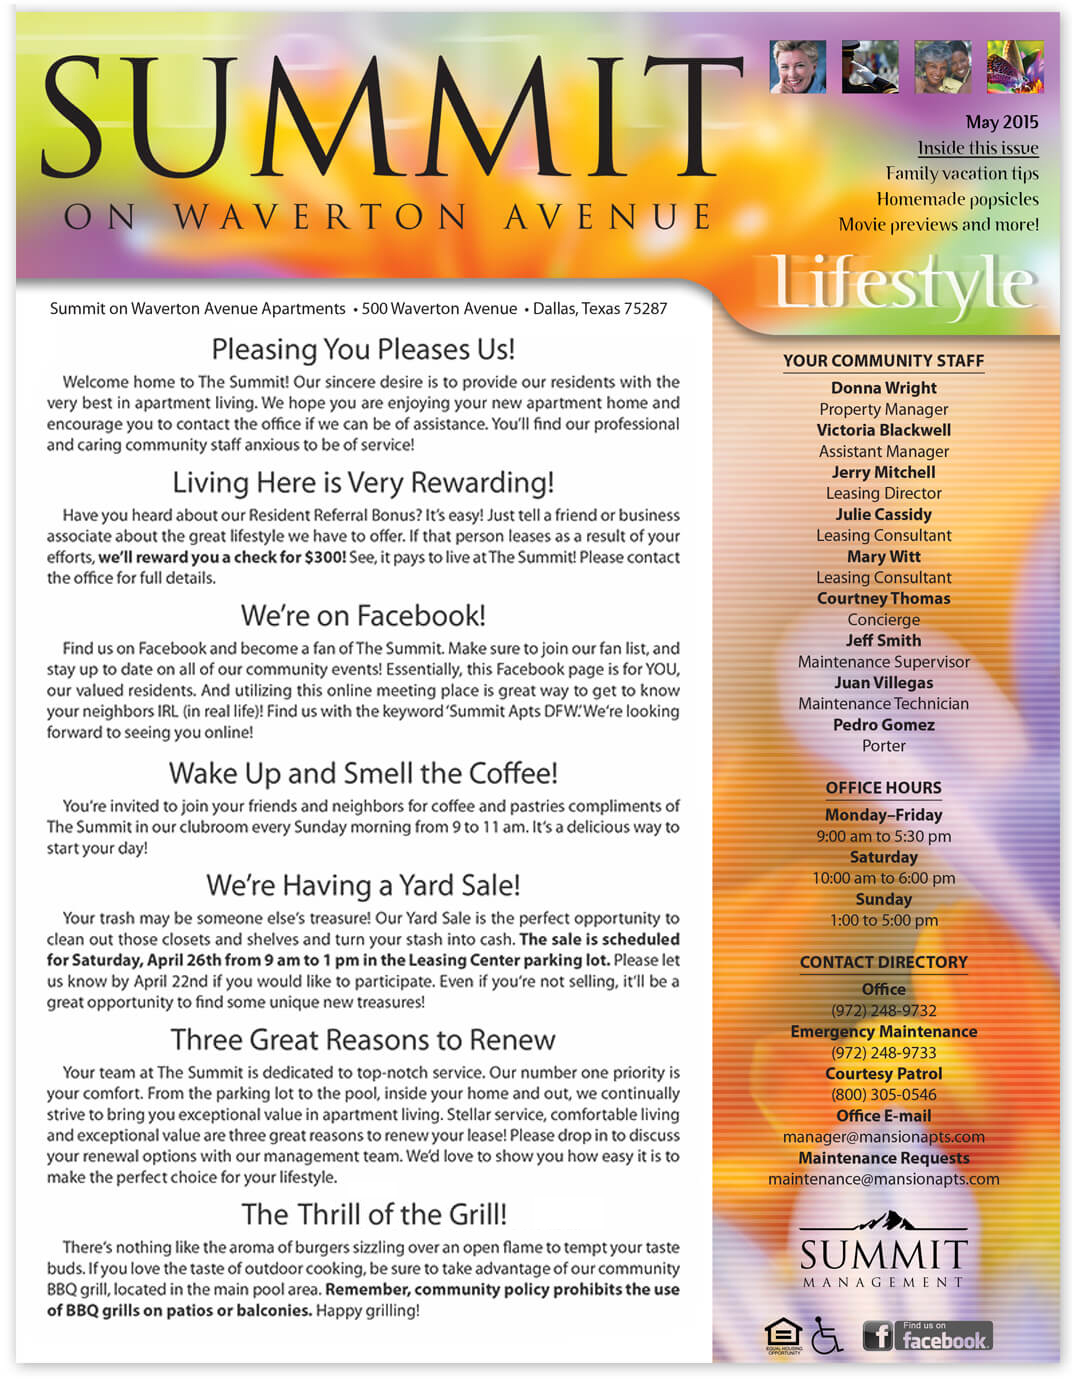 Printed Property Management Newsletters for Condominium and Multifamily